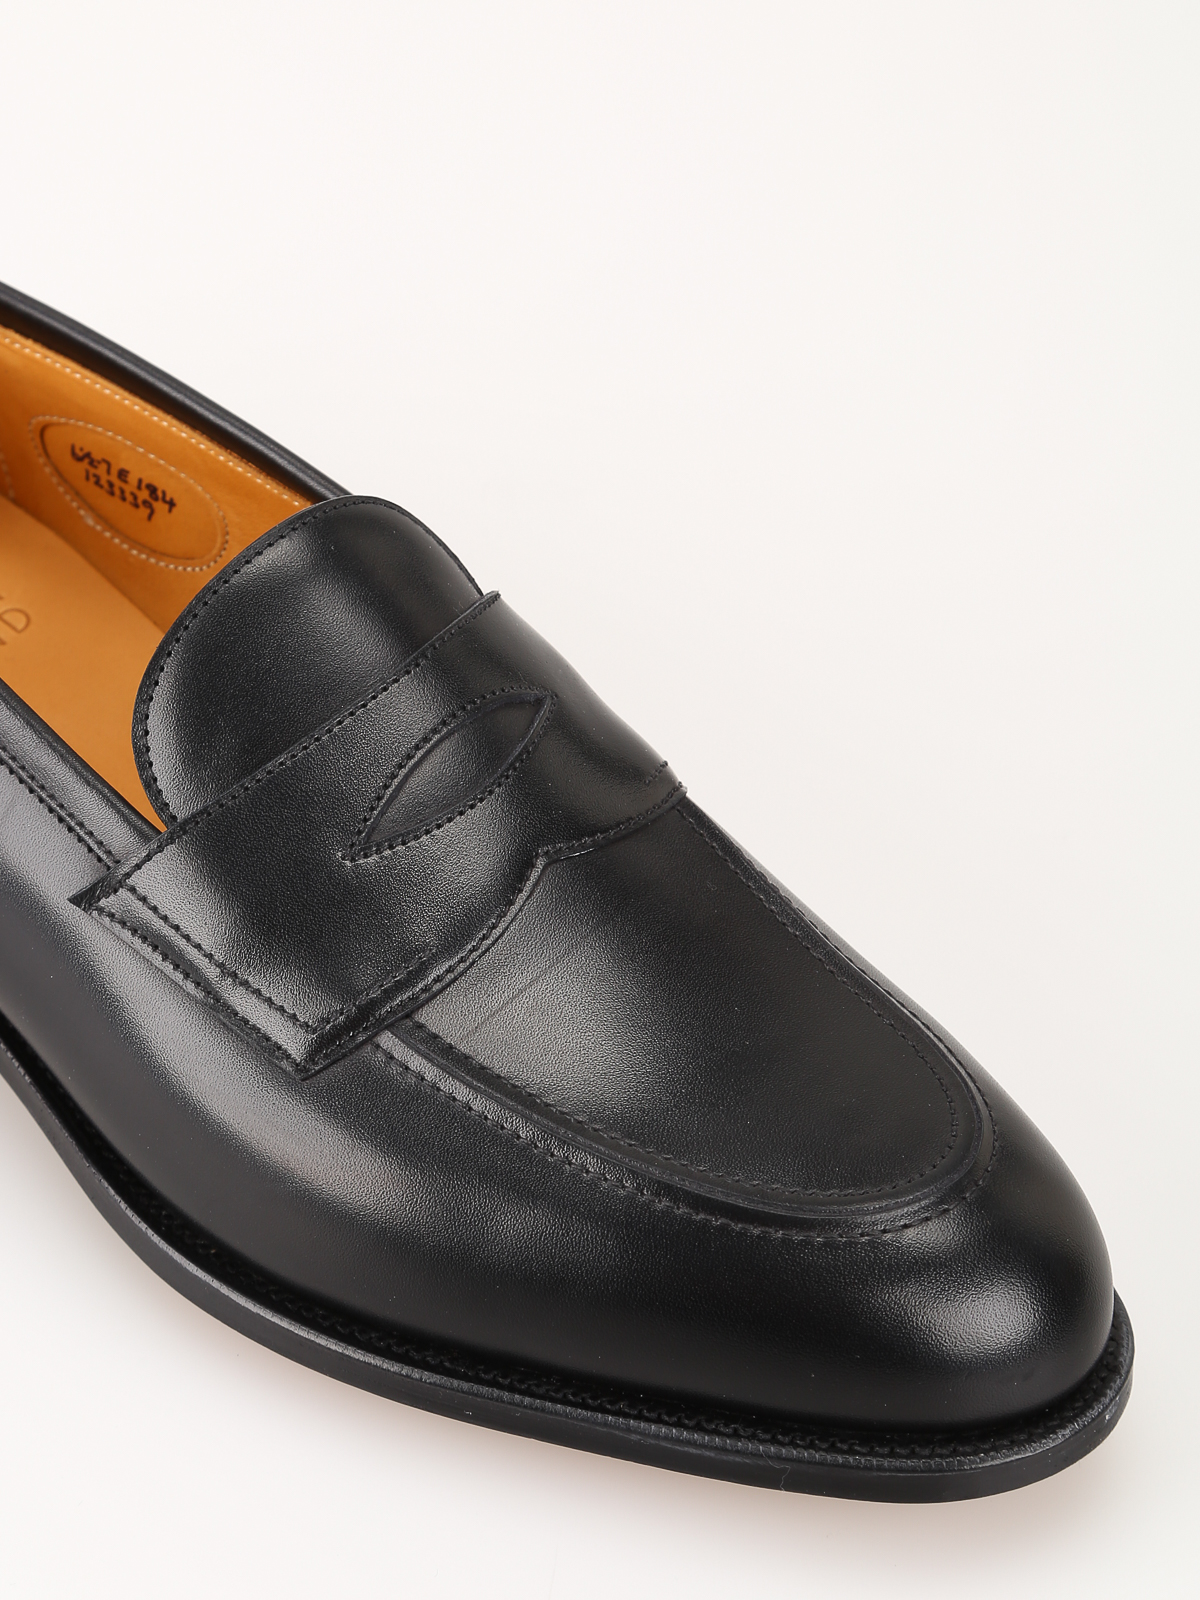 Edward Green Piccadilly calf leather penny loafers - PICCADILLYBLACKCALF